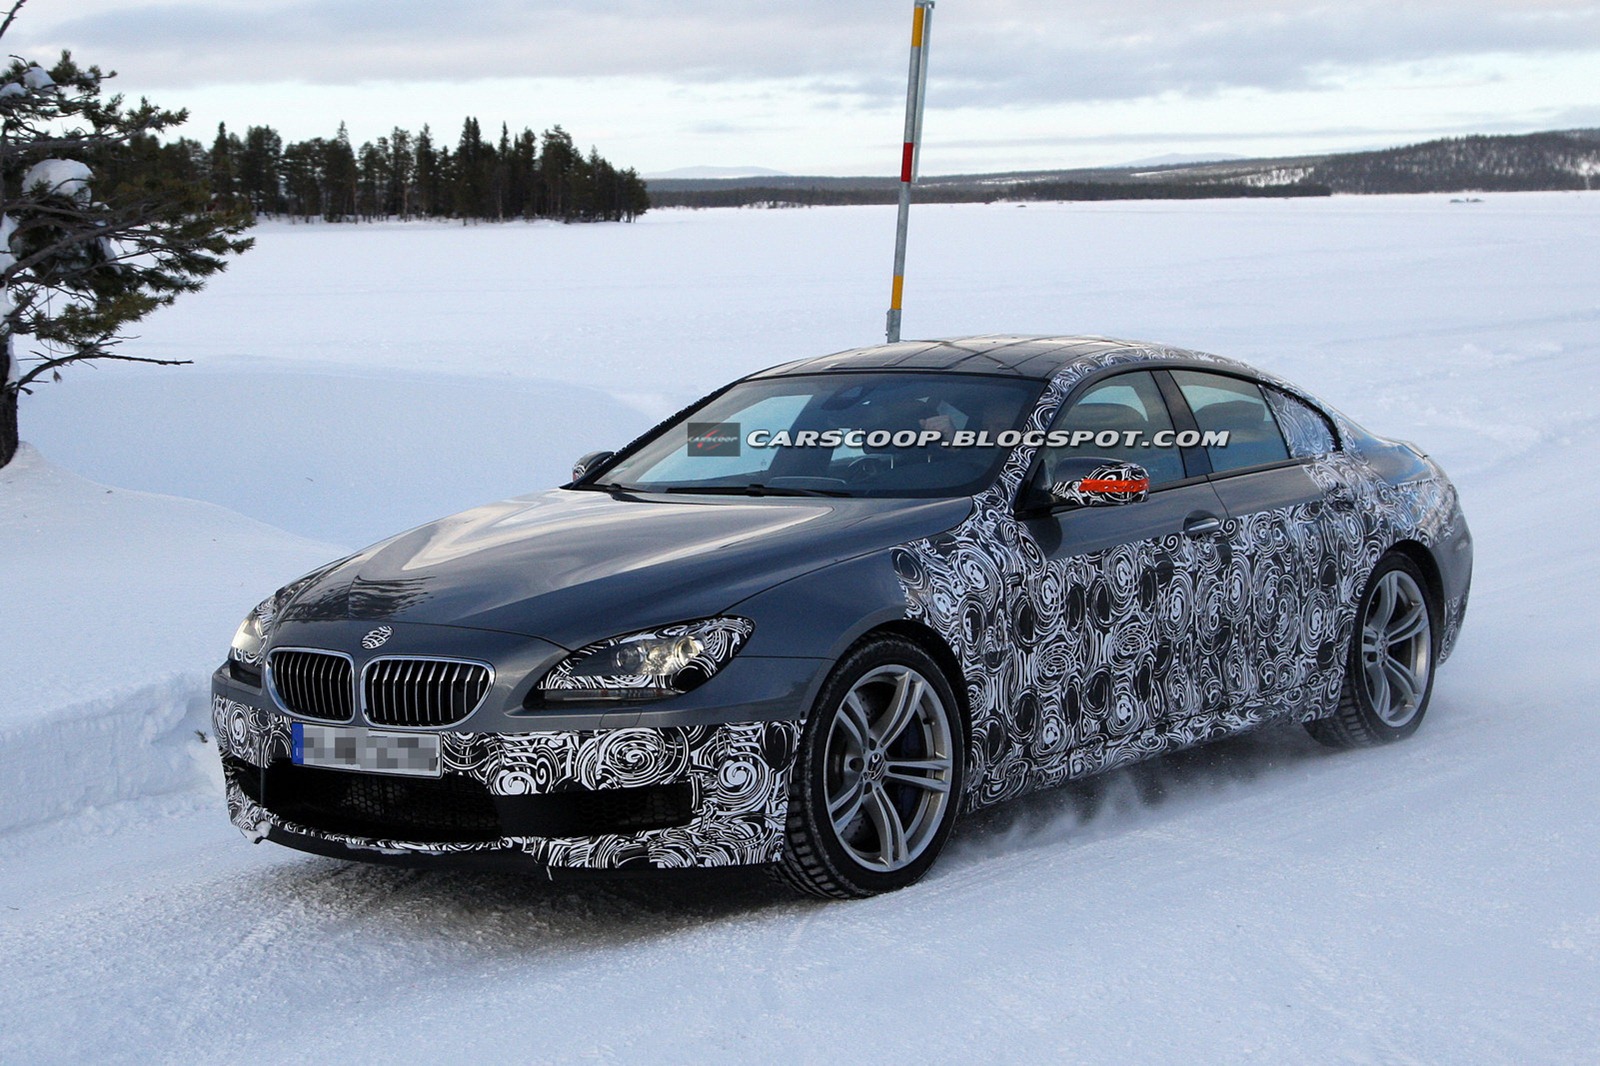 Spied: 2013 BMW M6 Gran Coupe